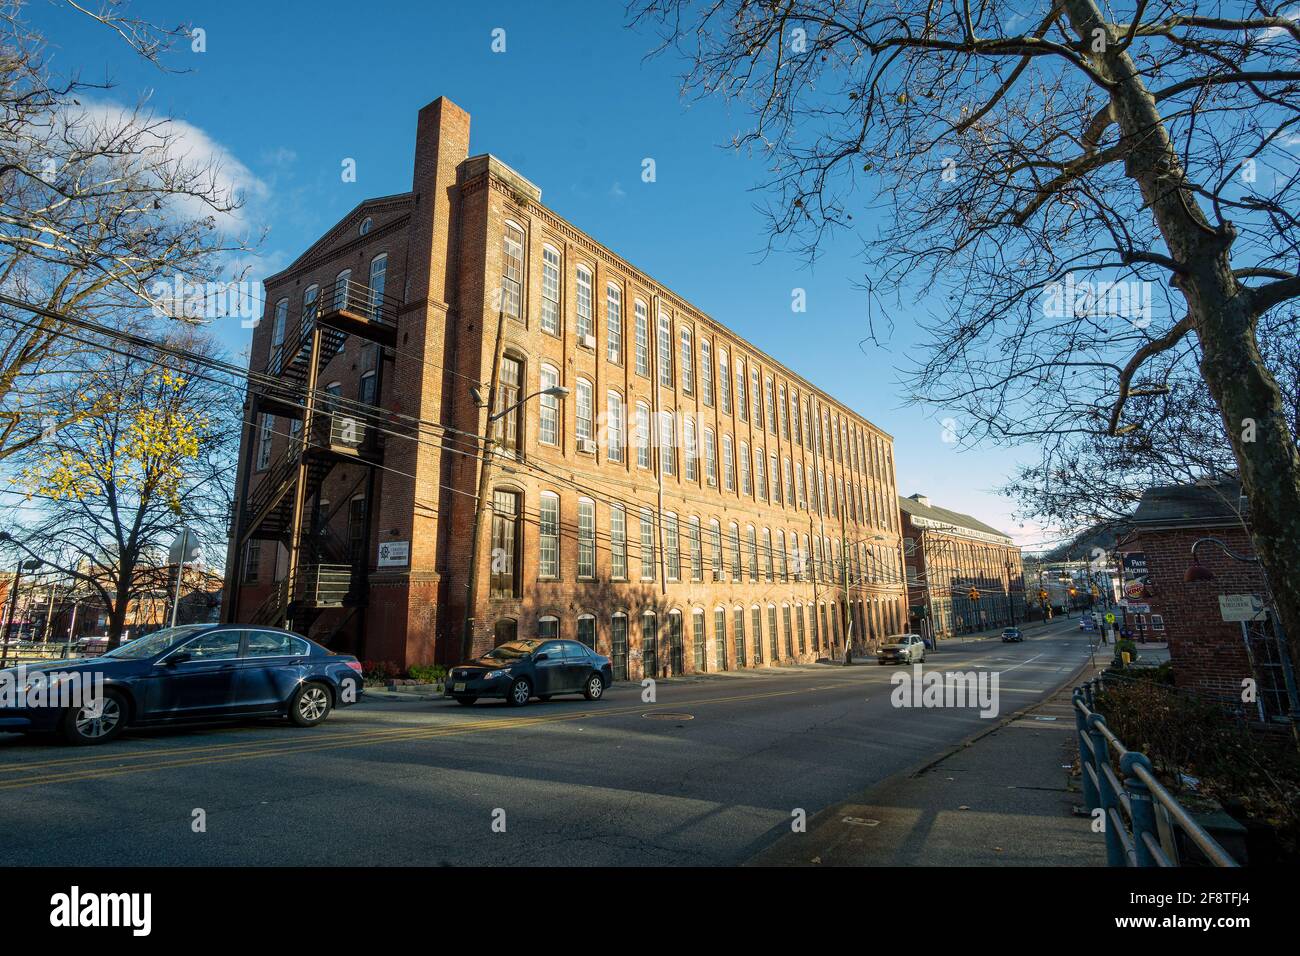 Paterson, NJ - USA - Dec. 6, 2020: Landscape view old red brick factory buildings that made up Paterson, NJ near the great falls. Stock Photo